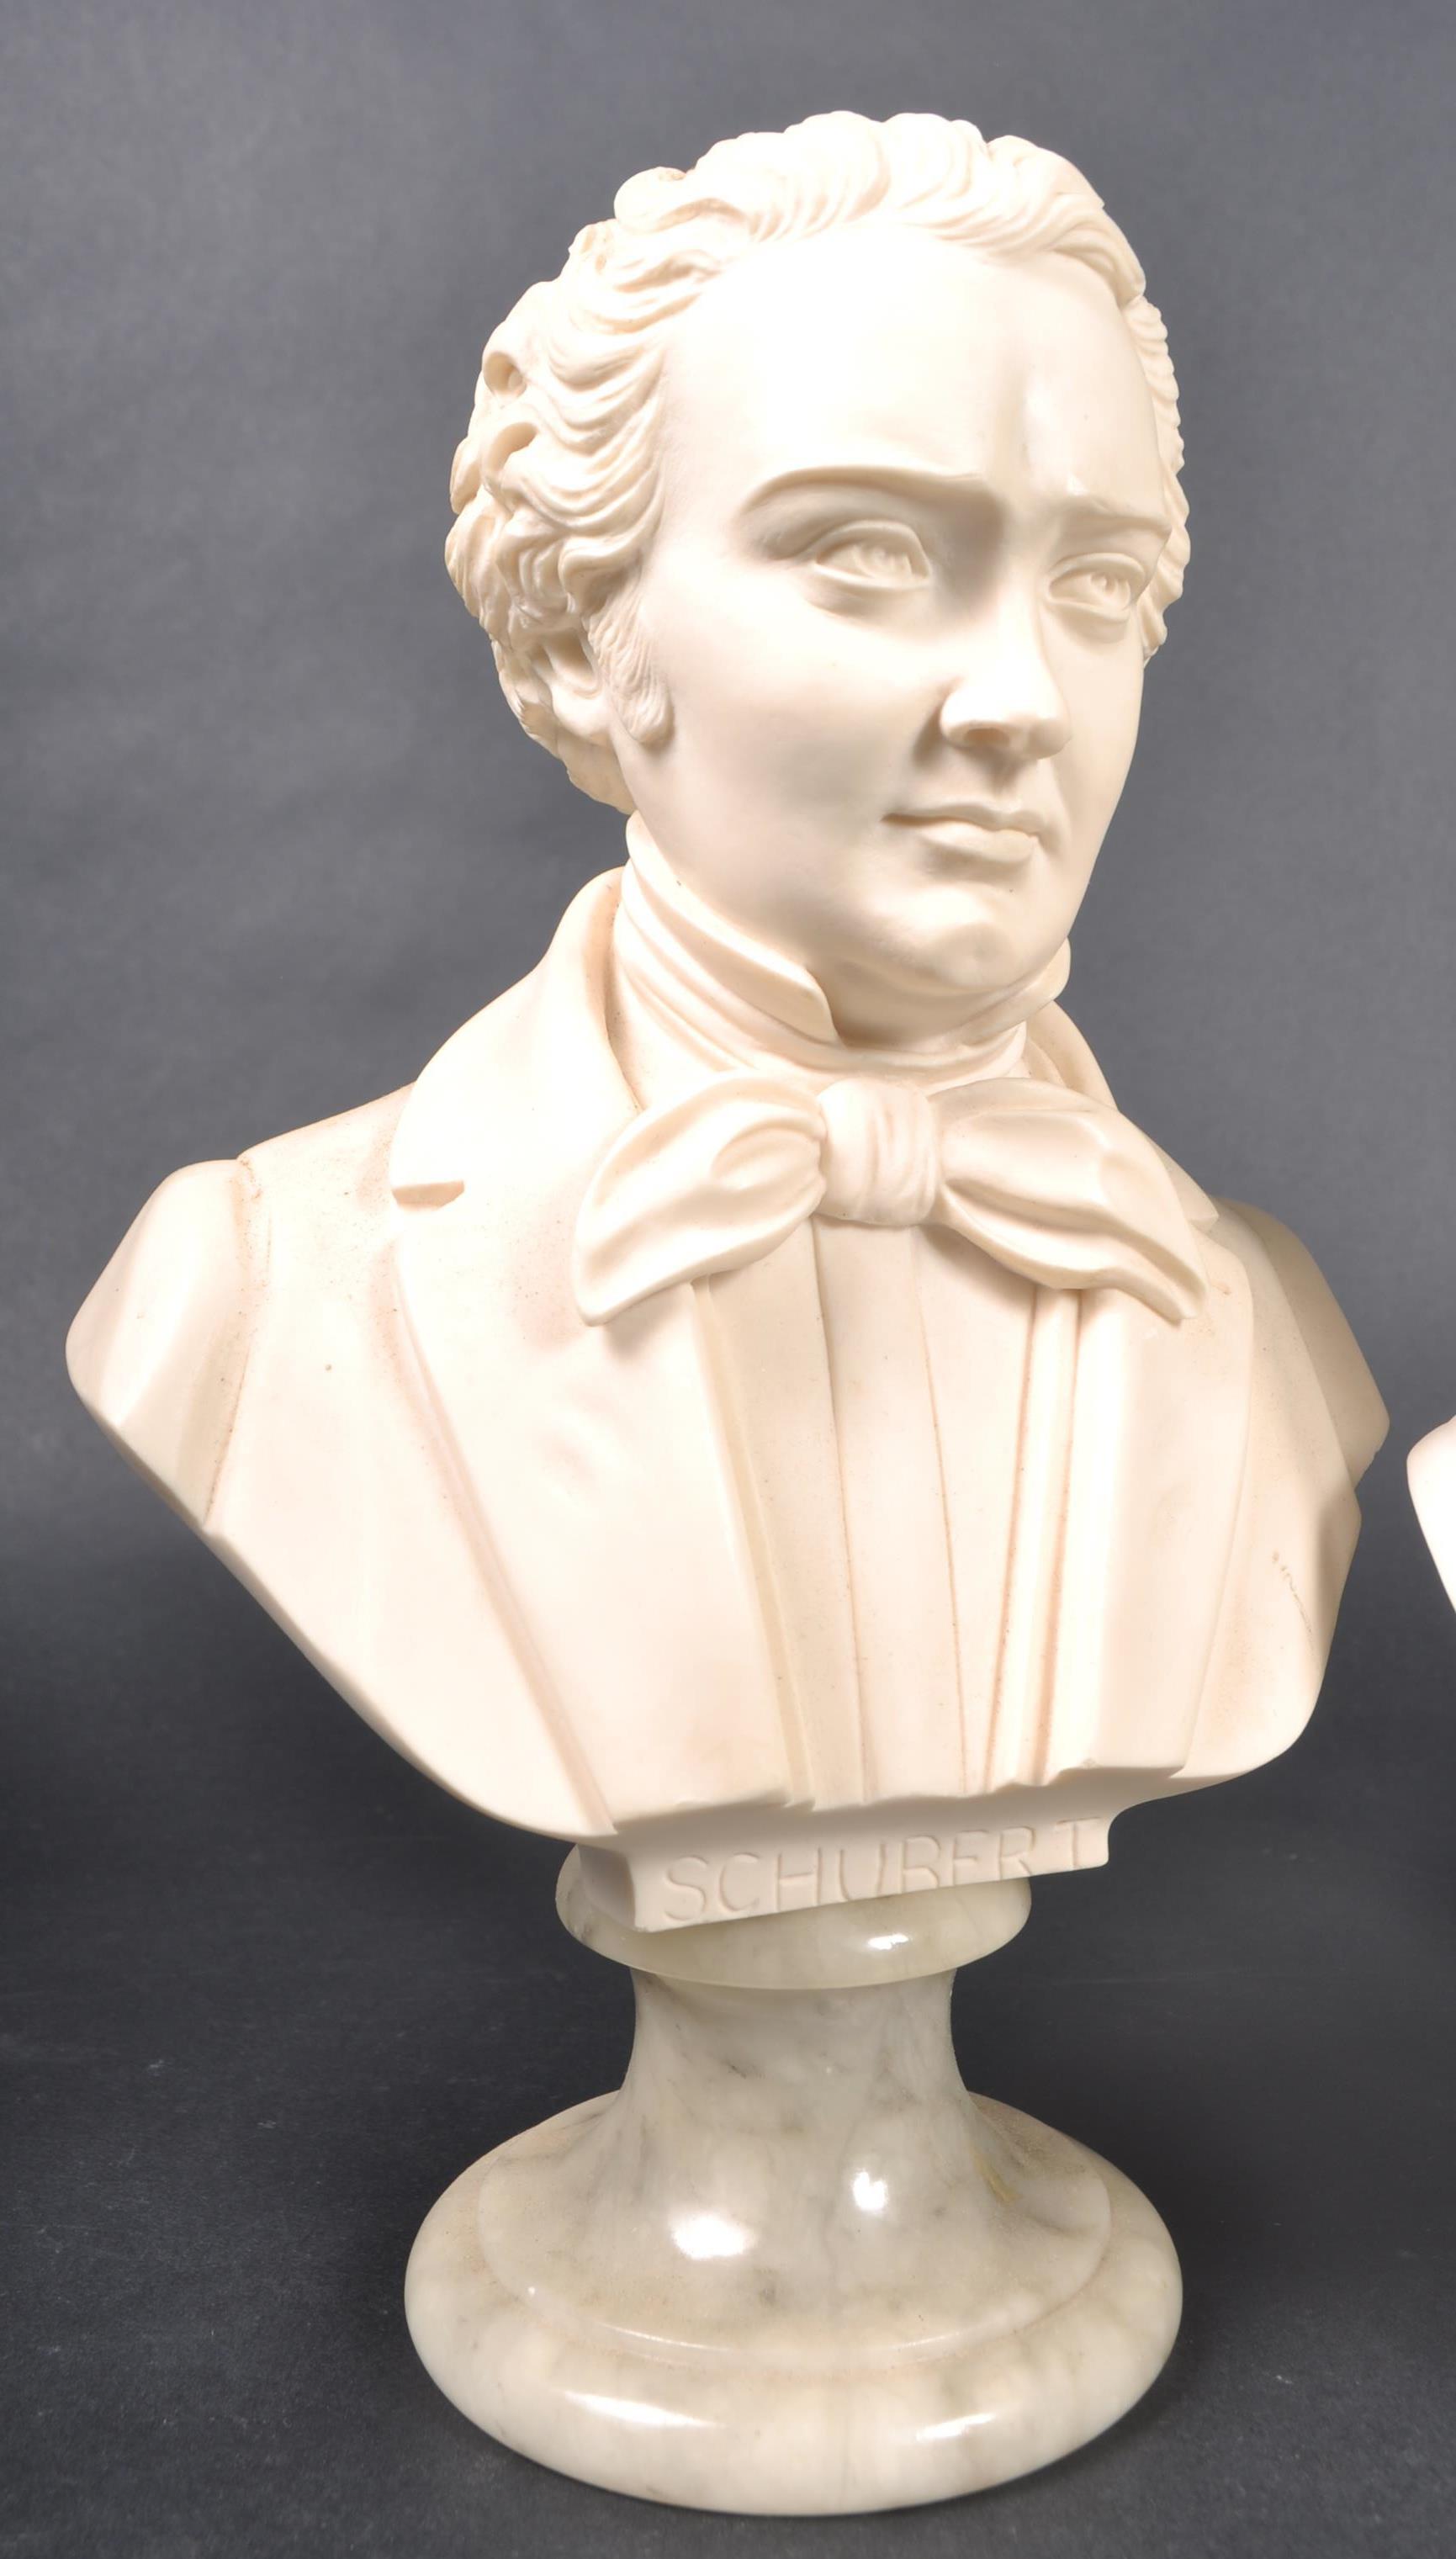 GROUP OF THREE BUSTS DEPICTING FAMOUS COMPOSERS - Image 3 of 9